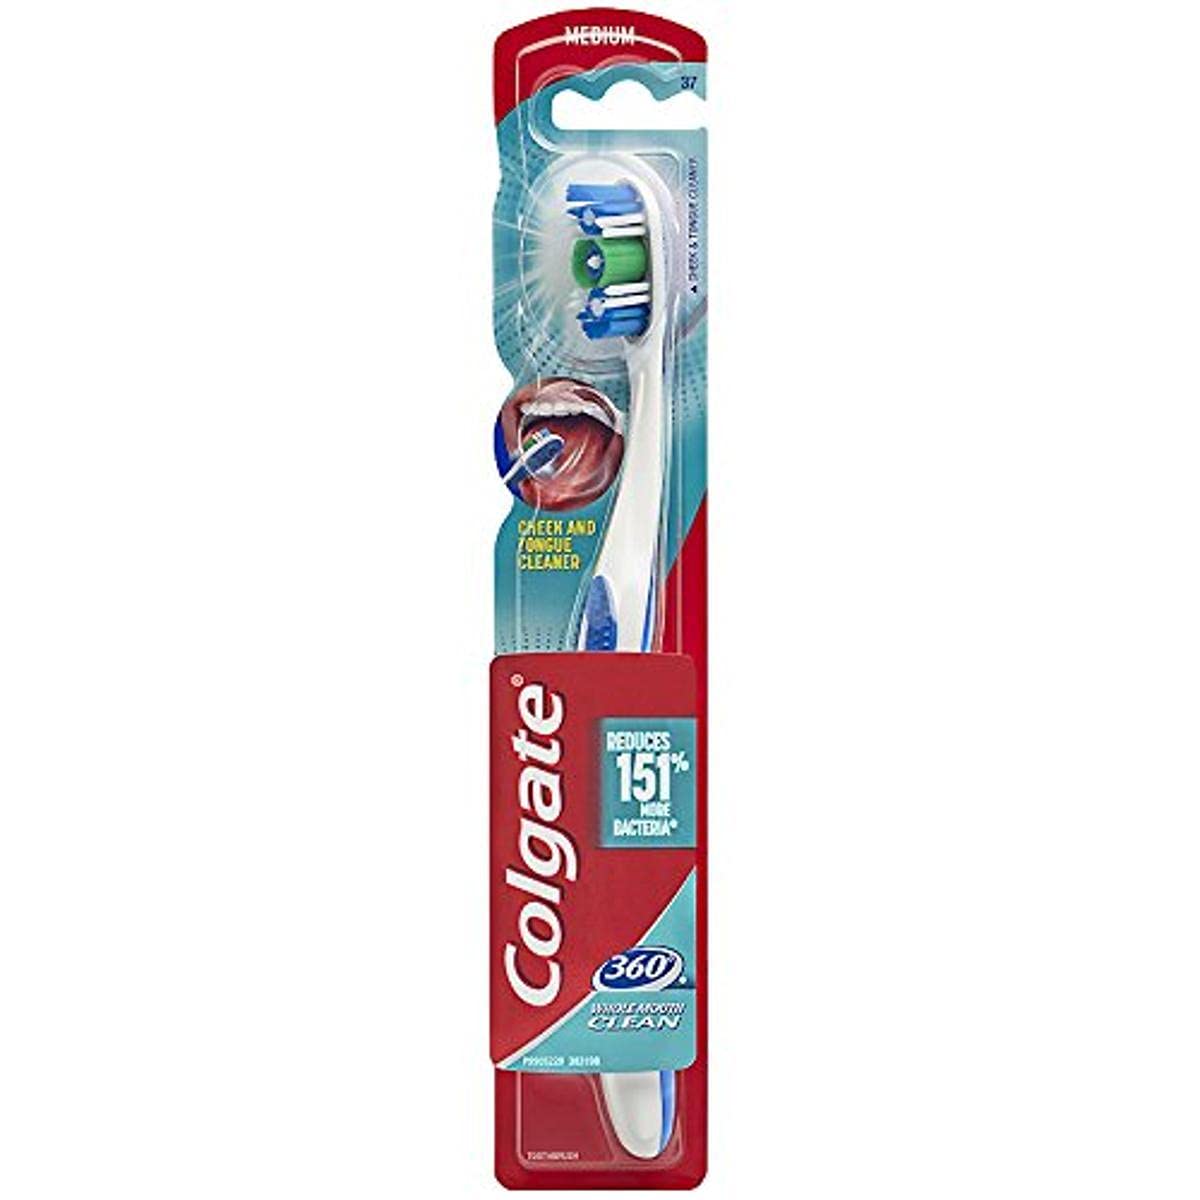 Colgate Battery Powered 360 Toothbrush with Tongue and Cheek Cleaner, Medium Toothbrush, 1 Pack